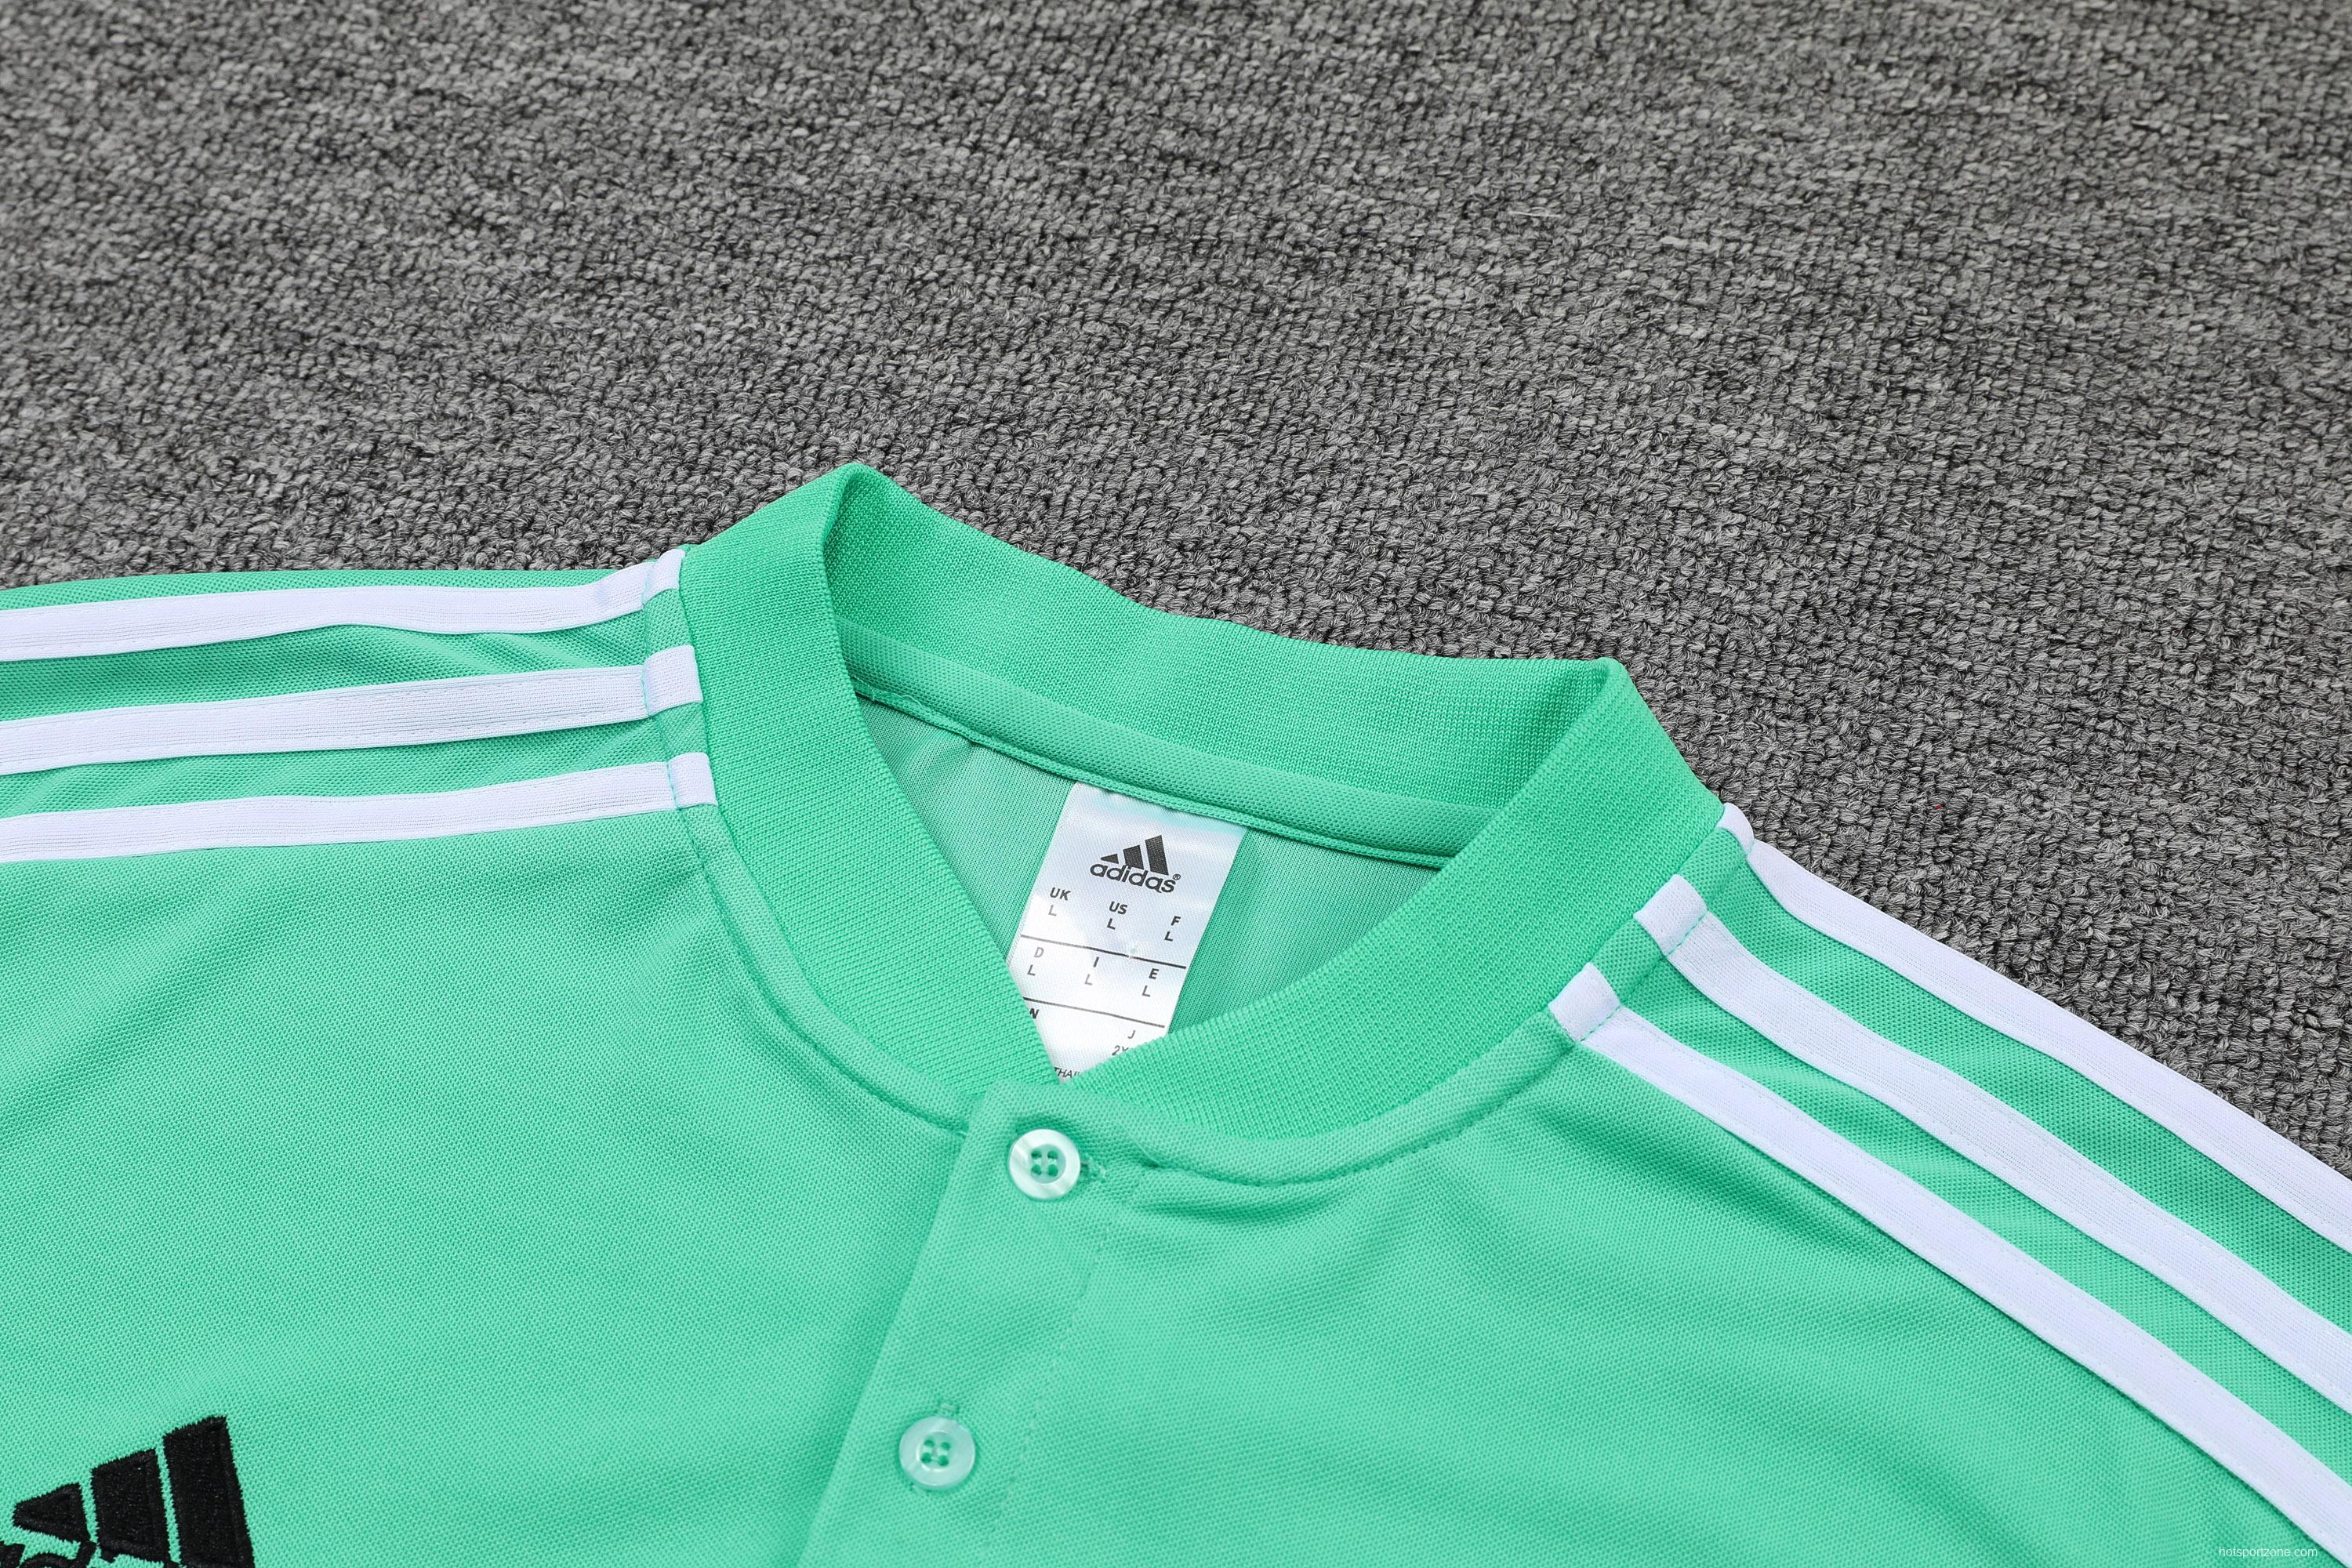 Arsenal POLO kit green (not supported to be sold separately)